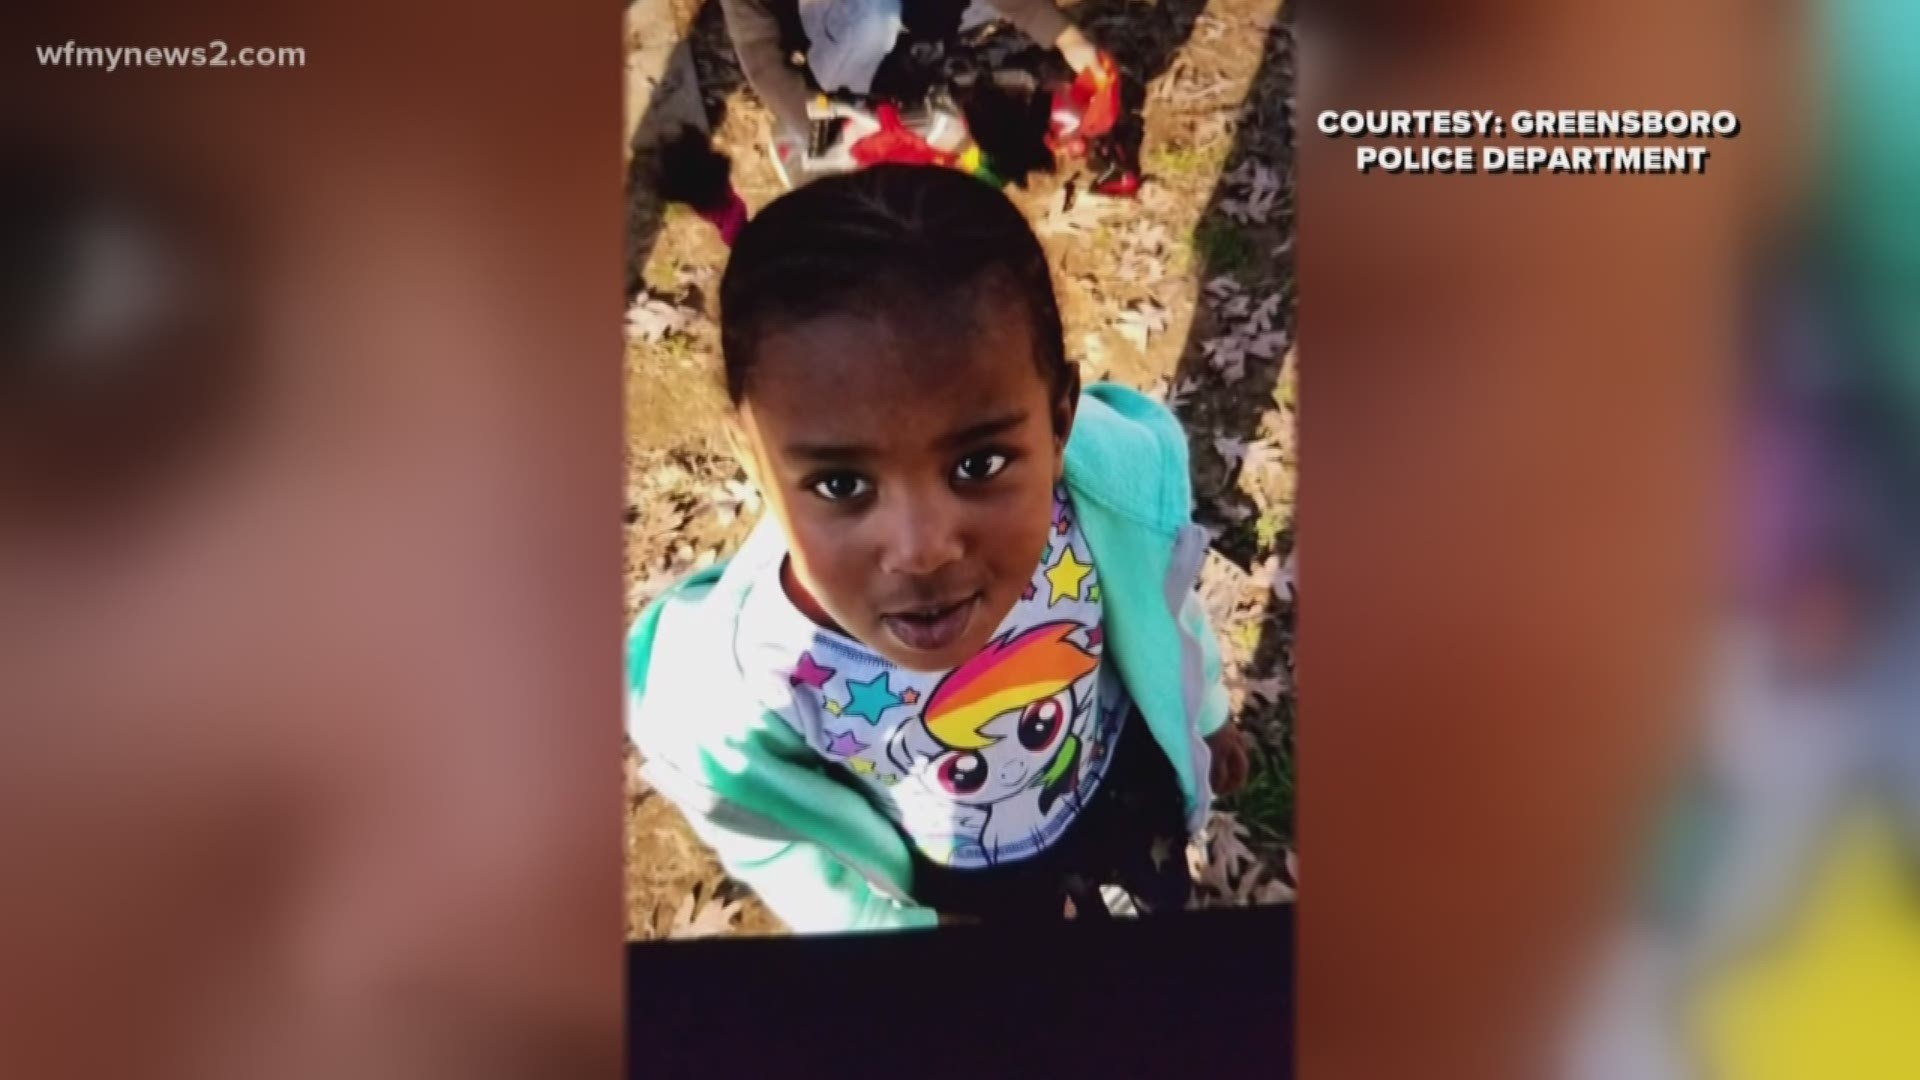 Investigators say they found the little girl alone outside a church on Dillard Street.